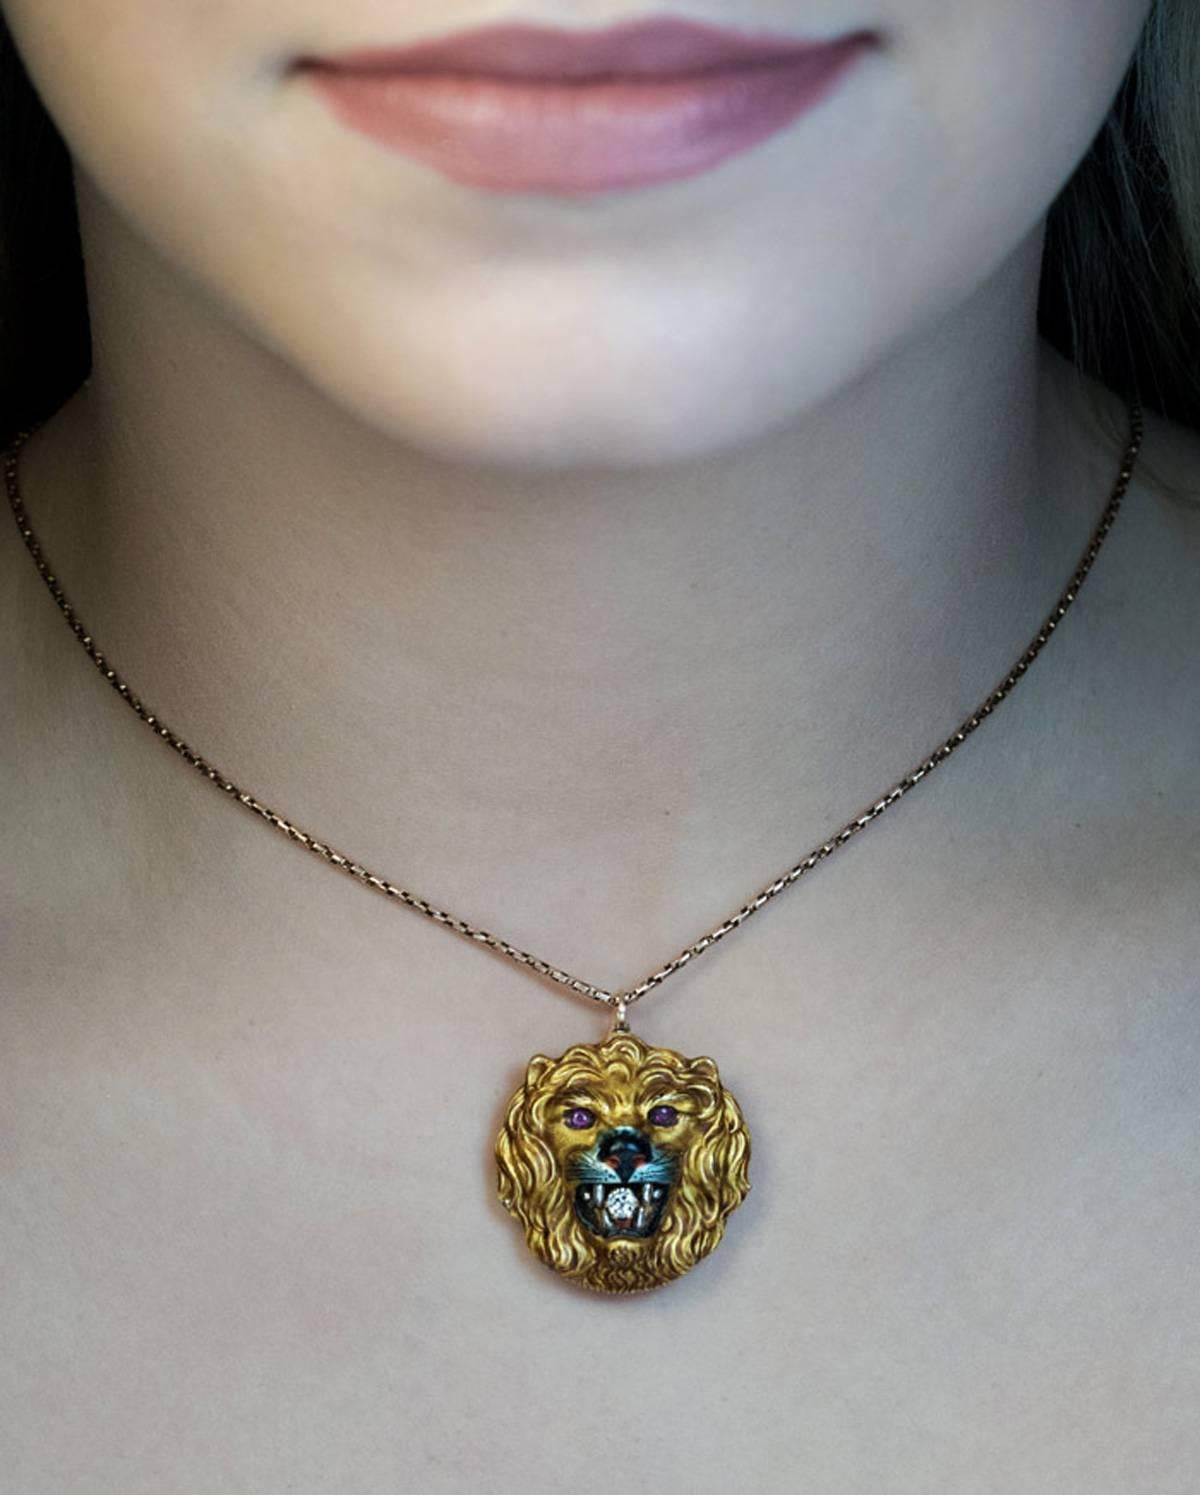 Circa 1890

An unusual antique Victorian era 14K gold pendant / brooch is superbly modeled as a lion’s head holding a diamond (approximately 0.16 ct). The eyes are set with rubies. The entire head is painted with enamel to depict the lion’s